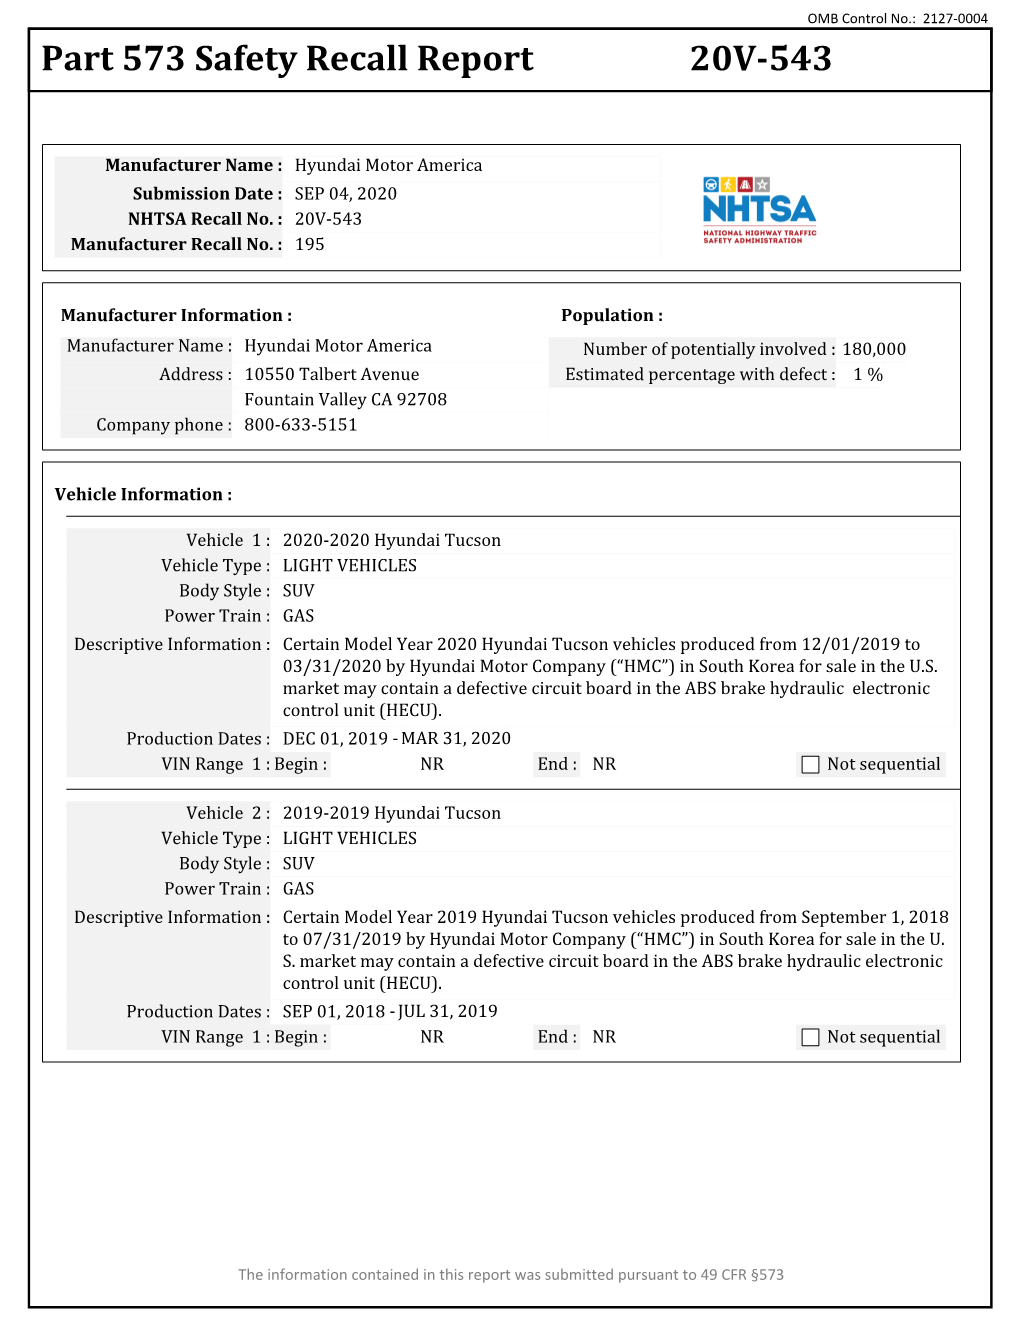 Part 573 Safety Recall Report 20V-543